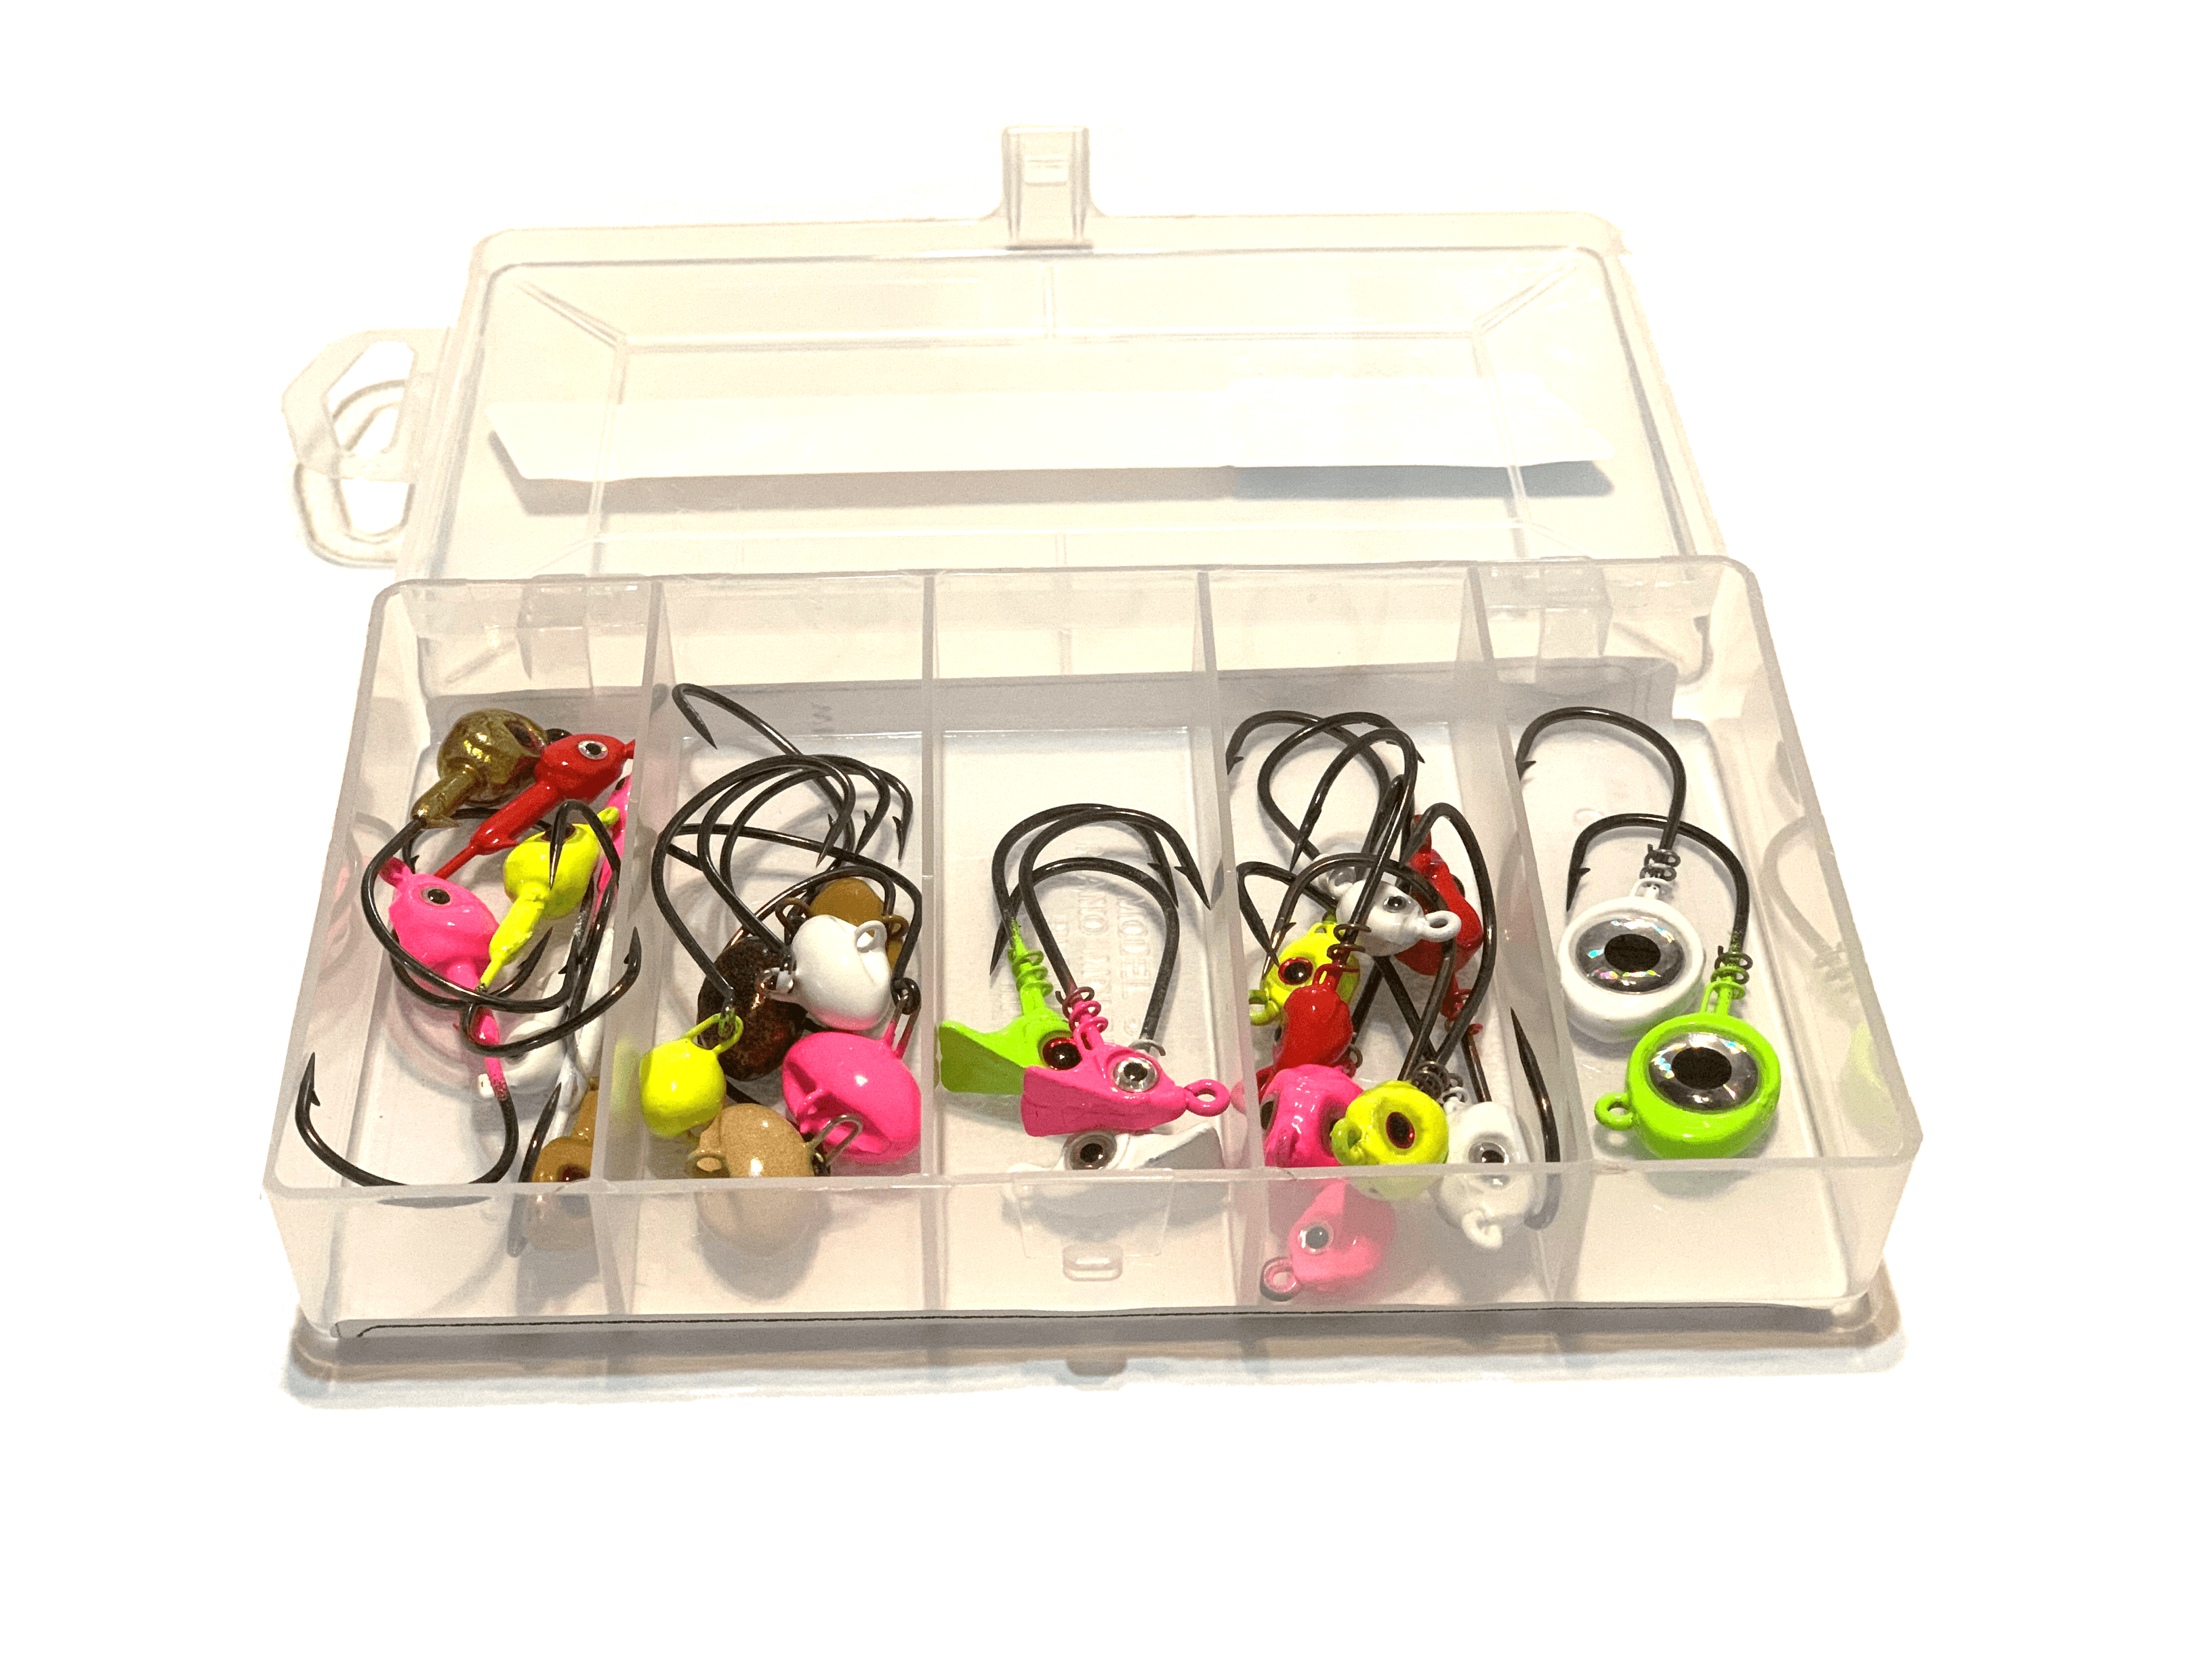 177pcs F 157pcs Fishing Accessories Kit Set With Tackle Box Space